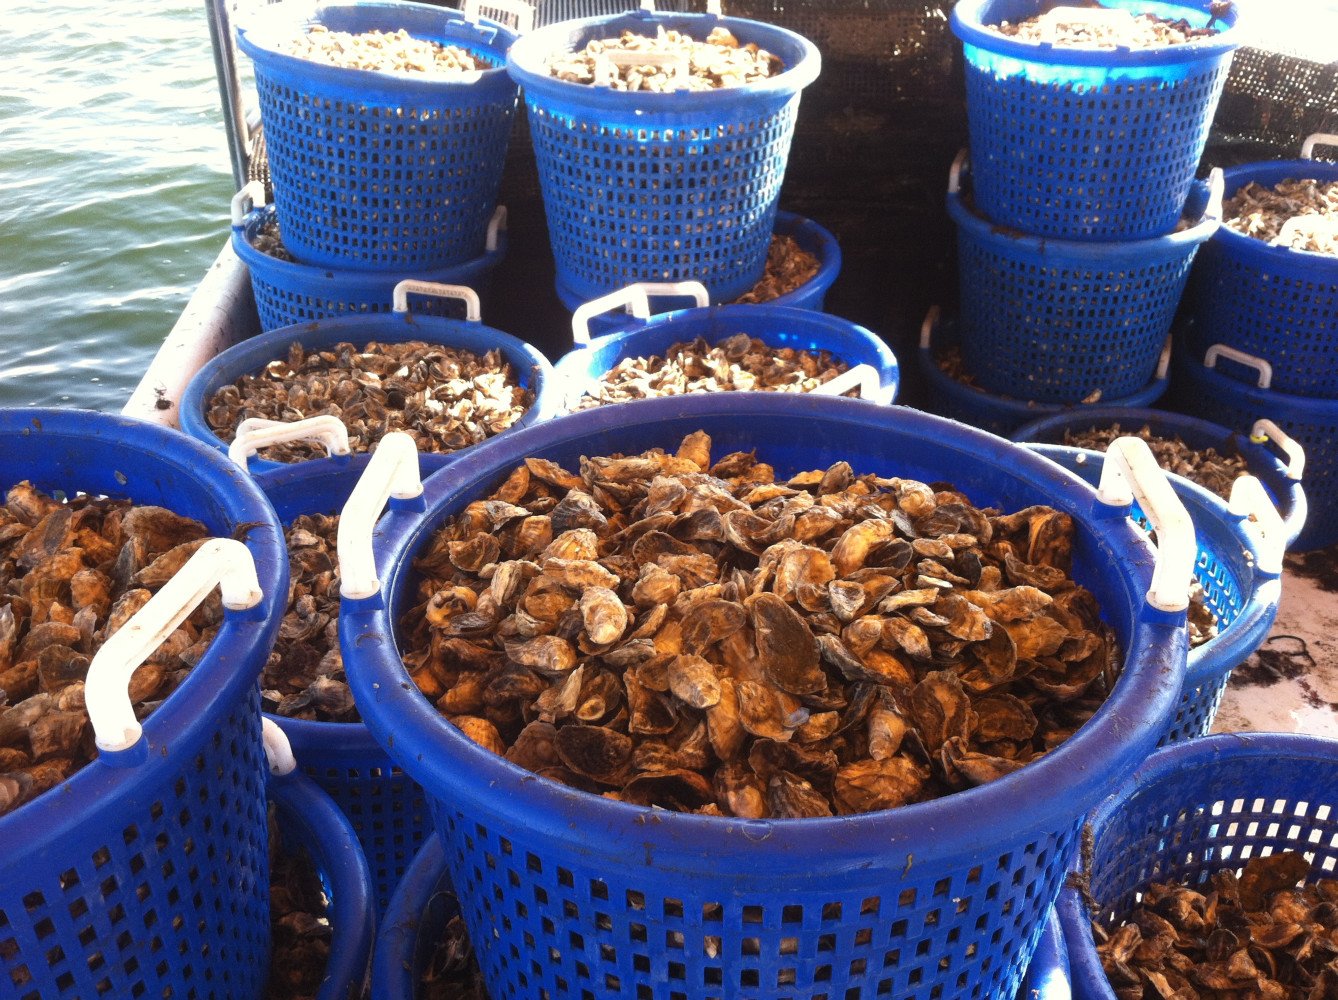 11-4-12
WE HARVESTED 50 BASKETS OF 1"+ OYSTER SEED FROM OUR SUBMERGED LEASE